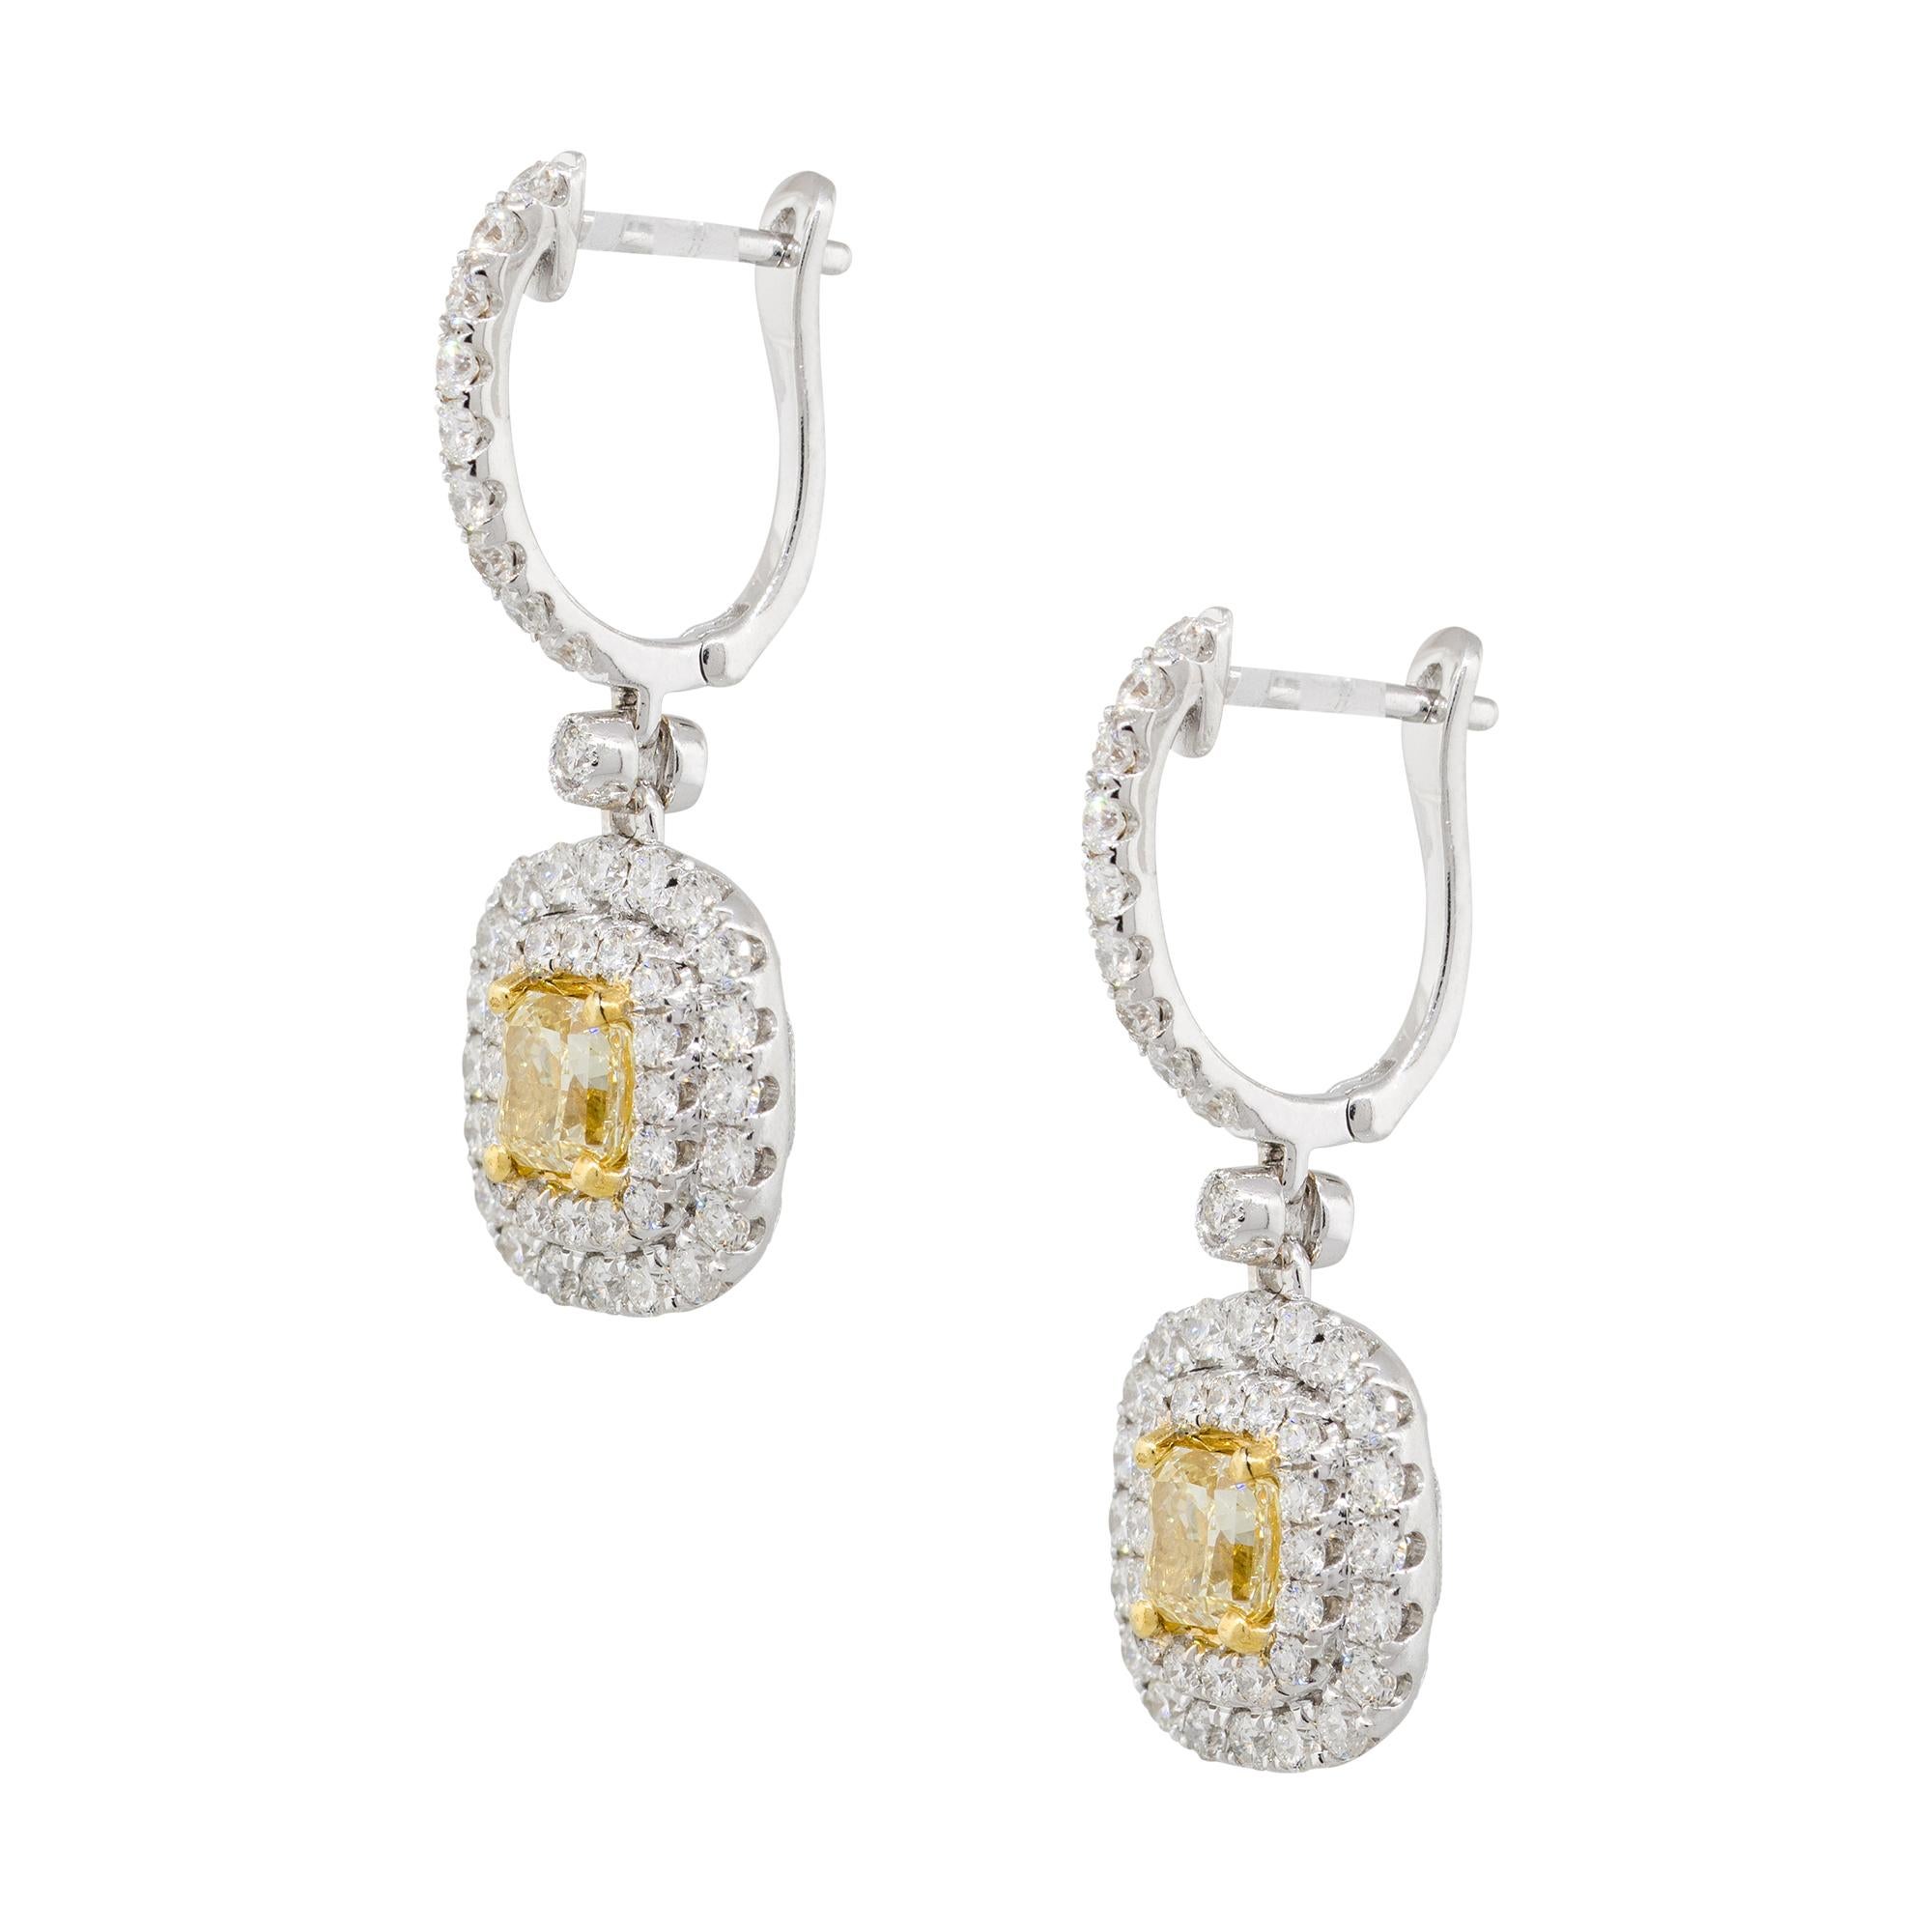 Material: 18k Yellow and White gold
Style: Double Halo Drop Earrings
Diamond Details: Approx. 1.30ctw cushion cut Diamonds. Diamonds are Fancy Yellow in color and VS in clarity
                             Approx. 1.56ctw of round cut Diamonds.